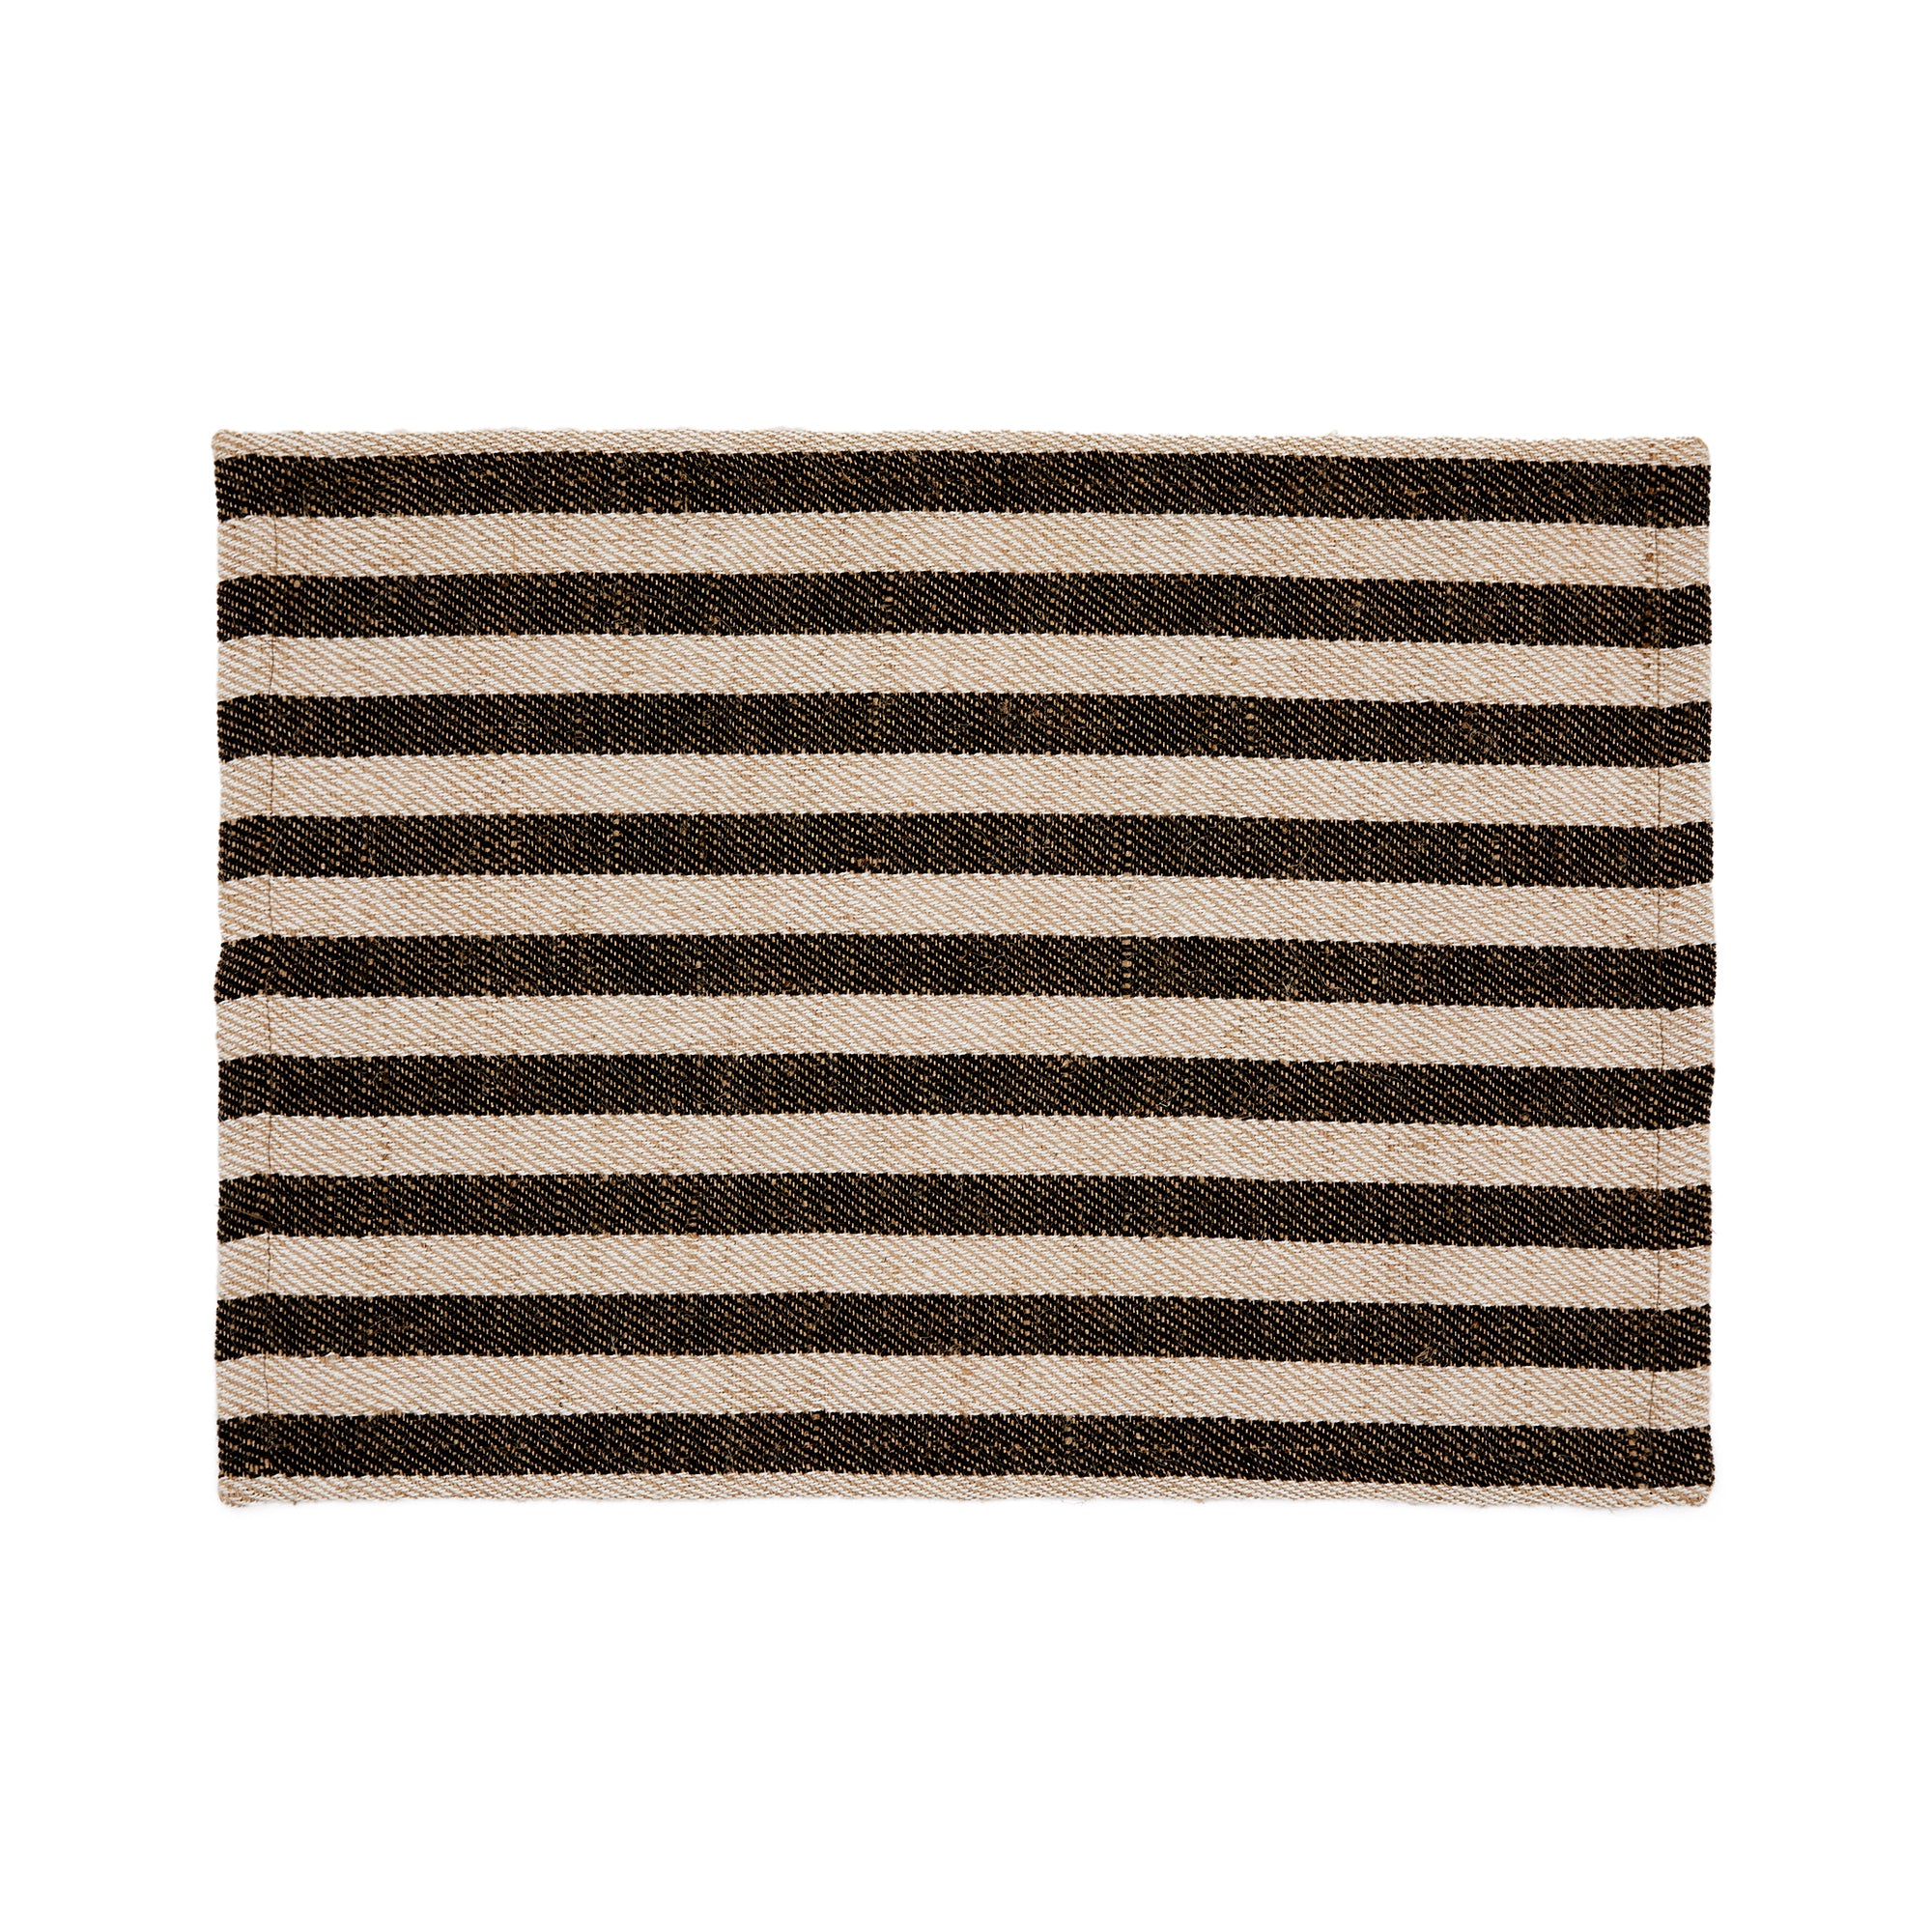 Selvana Set of 2 Custom Cotton Table Mats with Beige and Black Stripes